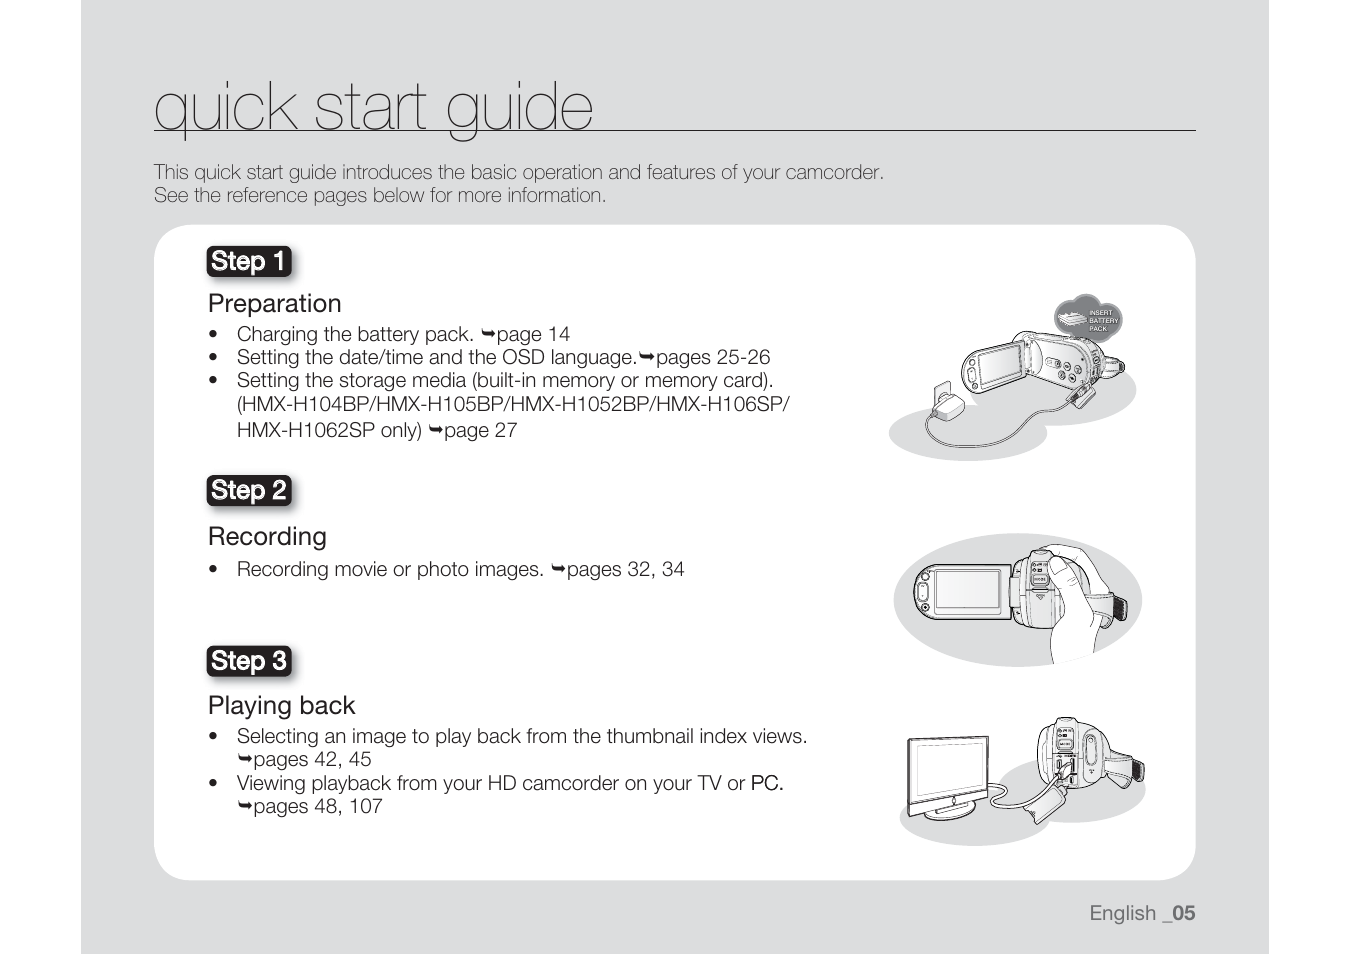 Quick start guide | Samsung HMX-H1062SP User Manual | Page 15 / 144